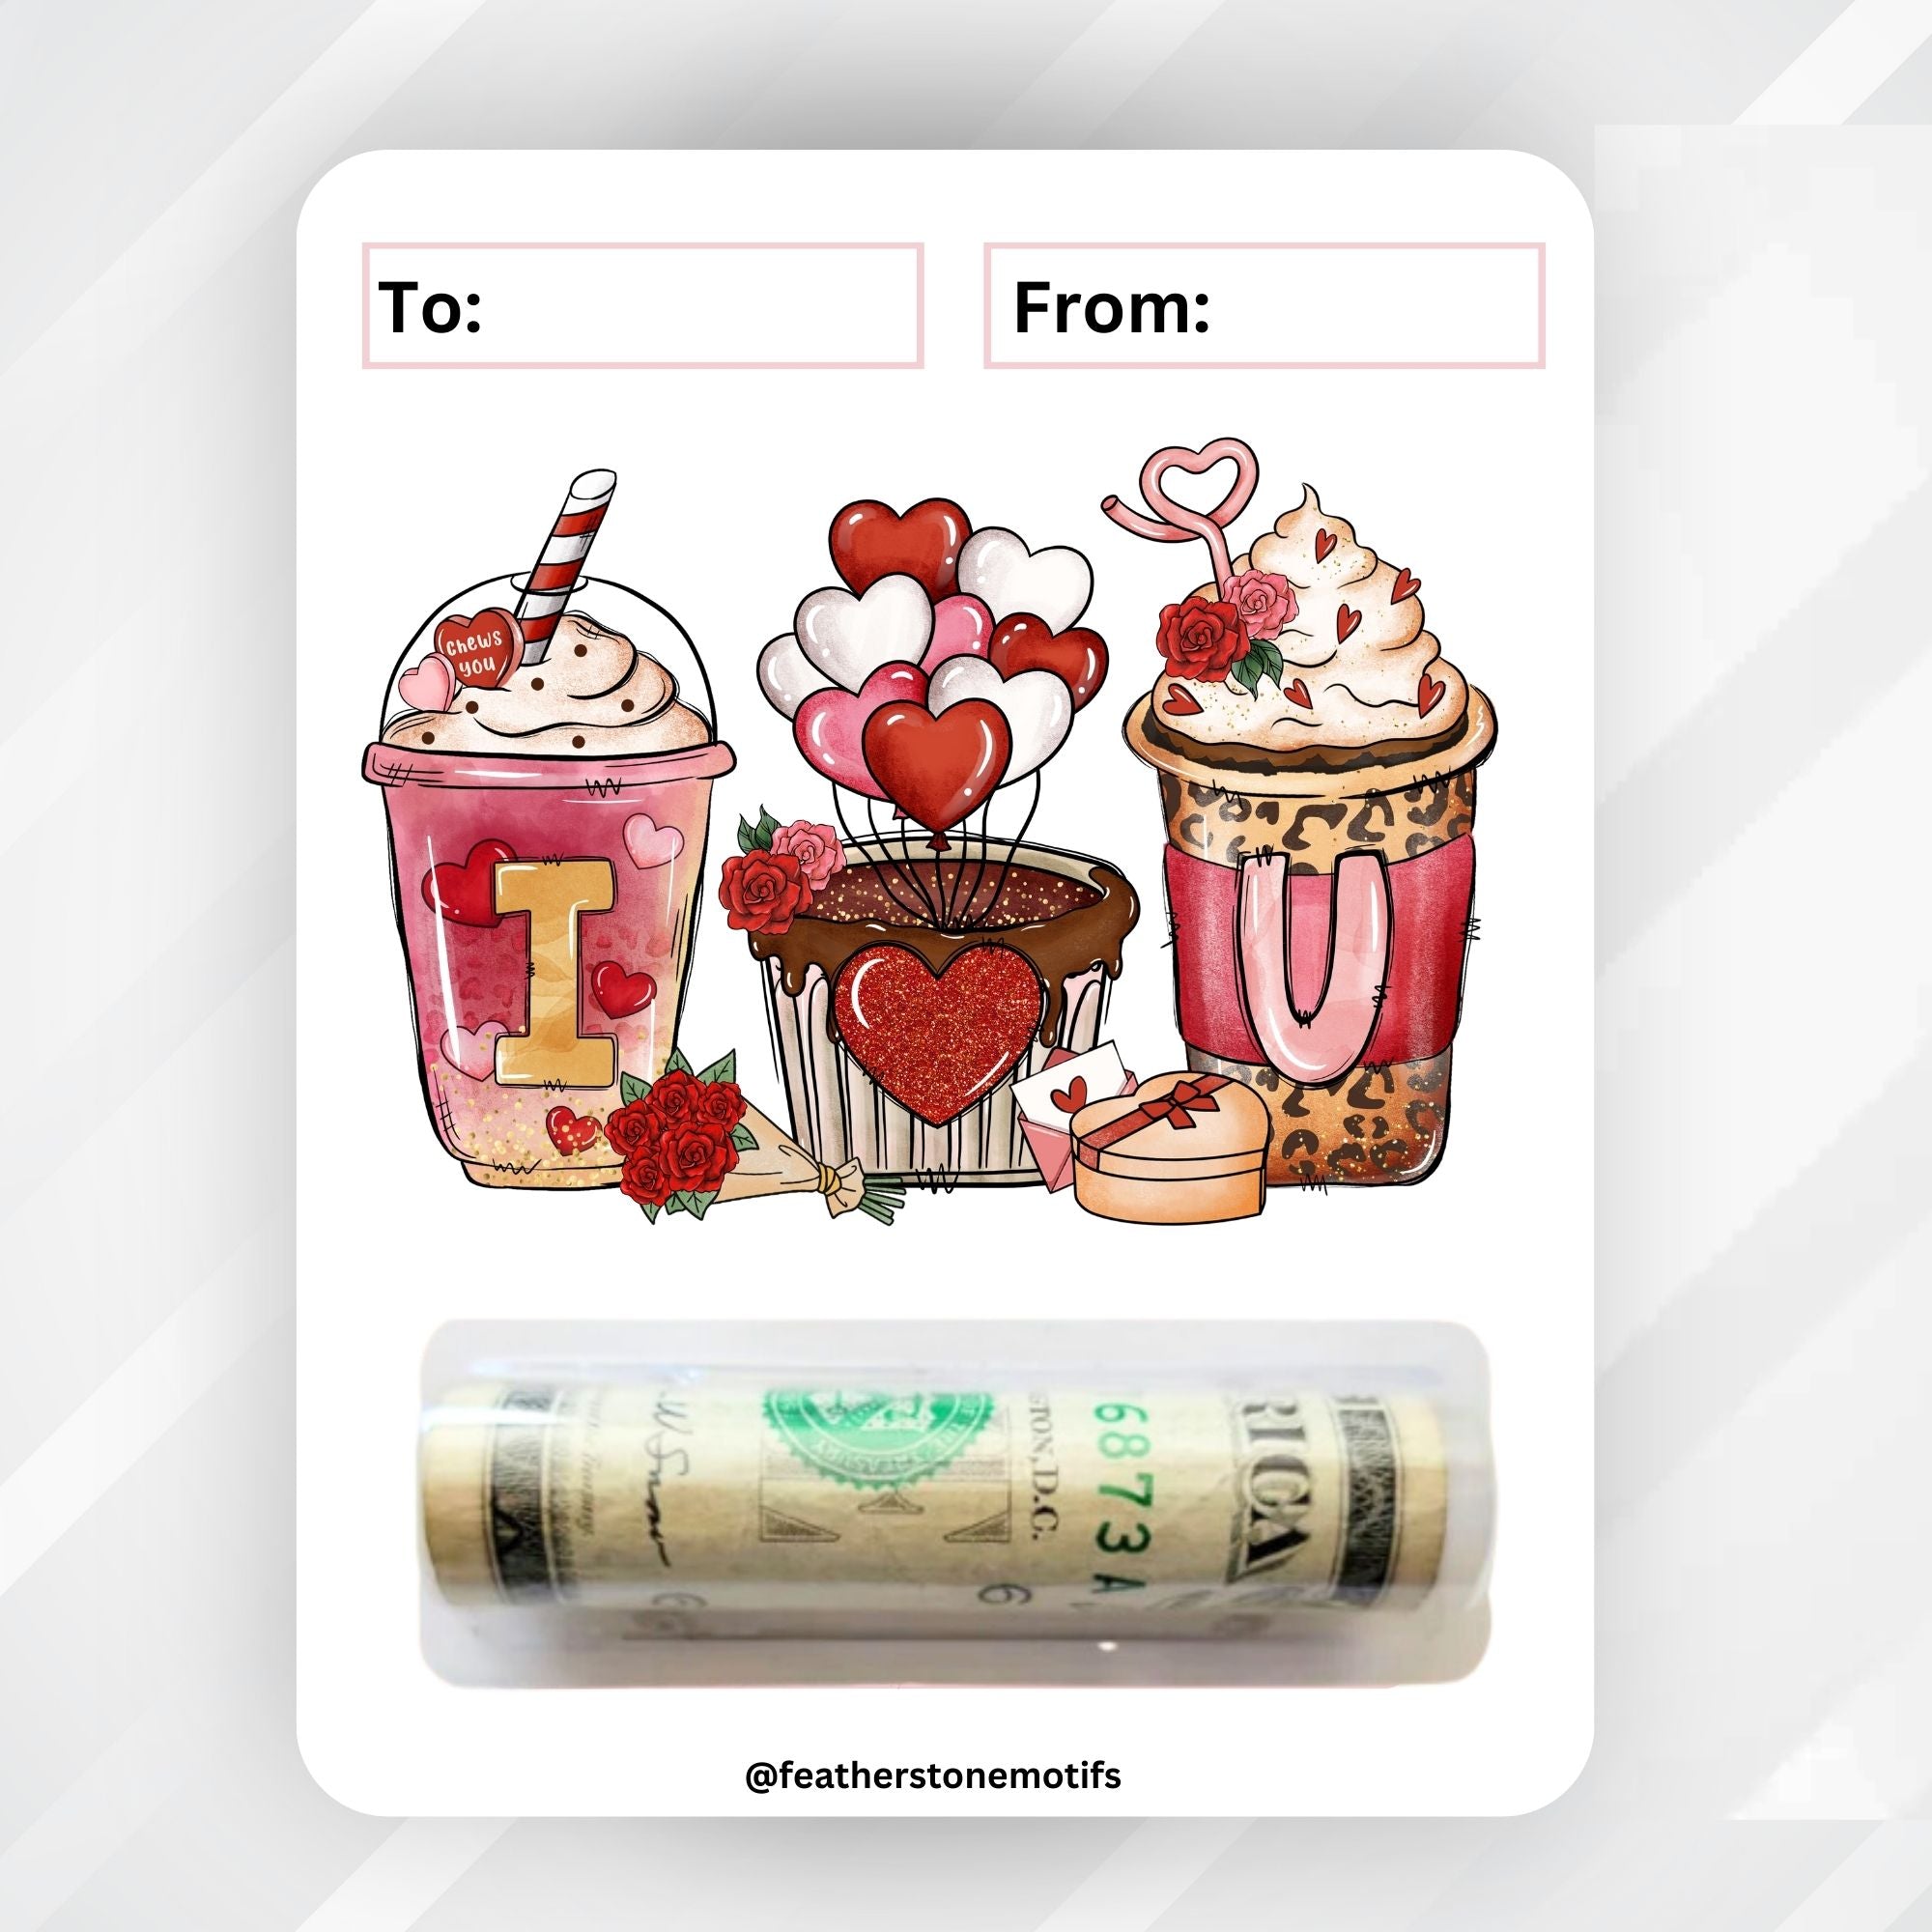 This image shows the money tube attached to the I heart U Valentine Money Card.